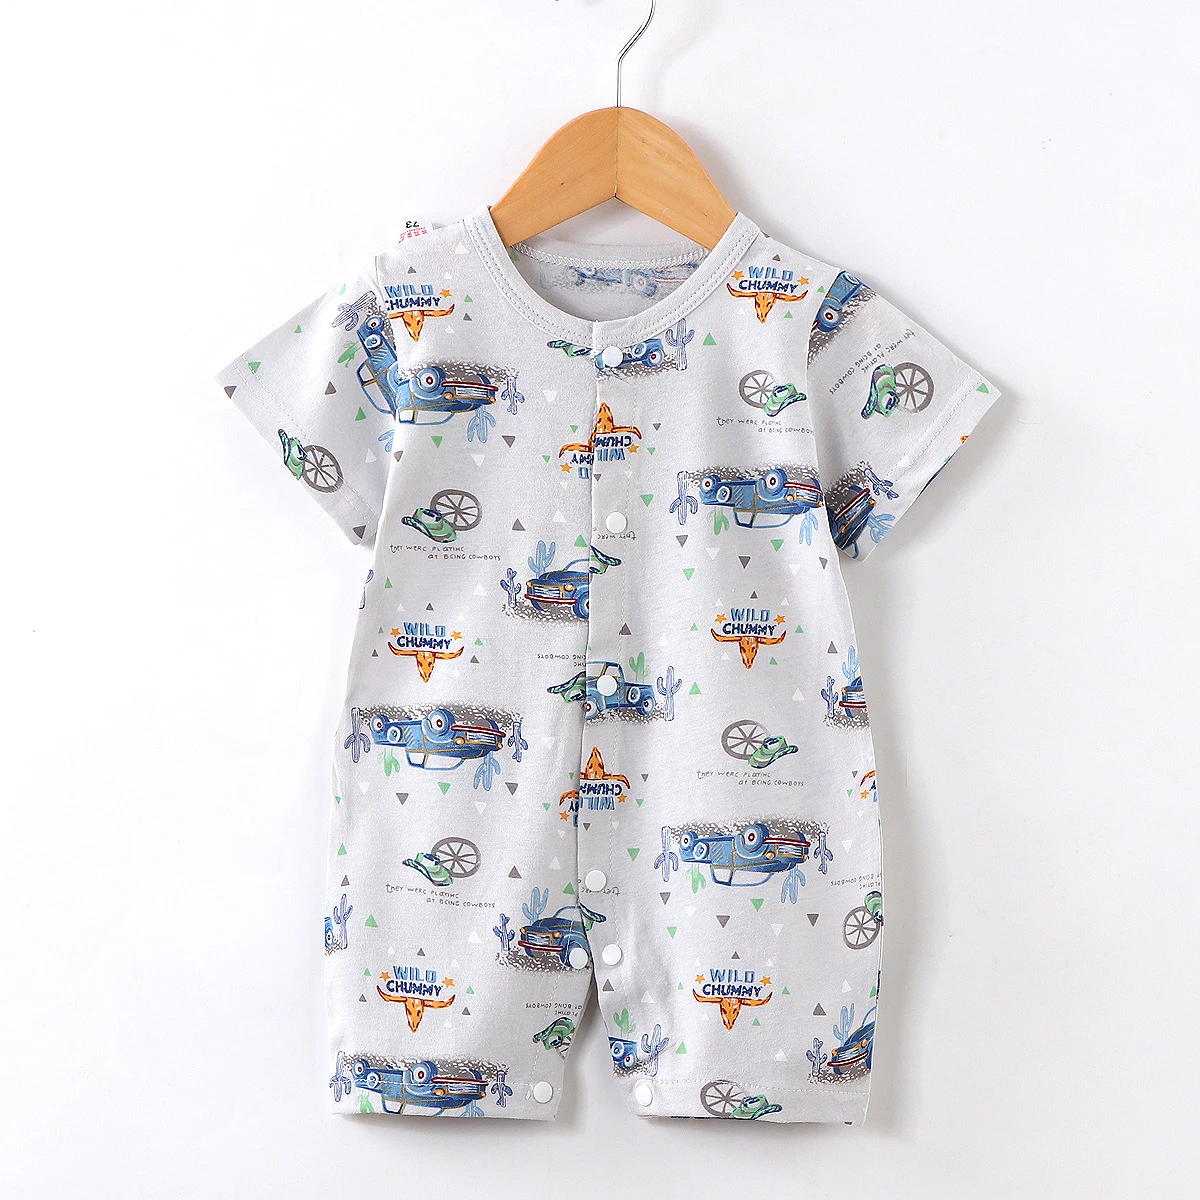 Baby Jumpsuit Cotton  3m-24months Baby Boys Pajamas Jumpsuit 100% Cotton Kids Girl Boy Rompers Fashion Casual Cool Toddler Infant Unisex Onepiece 2022 bamboo baby bodysuits	